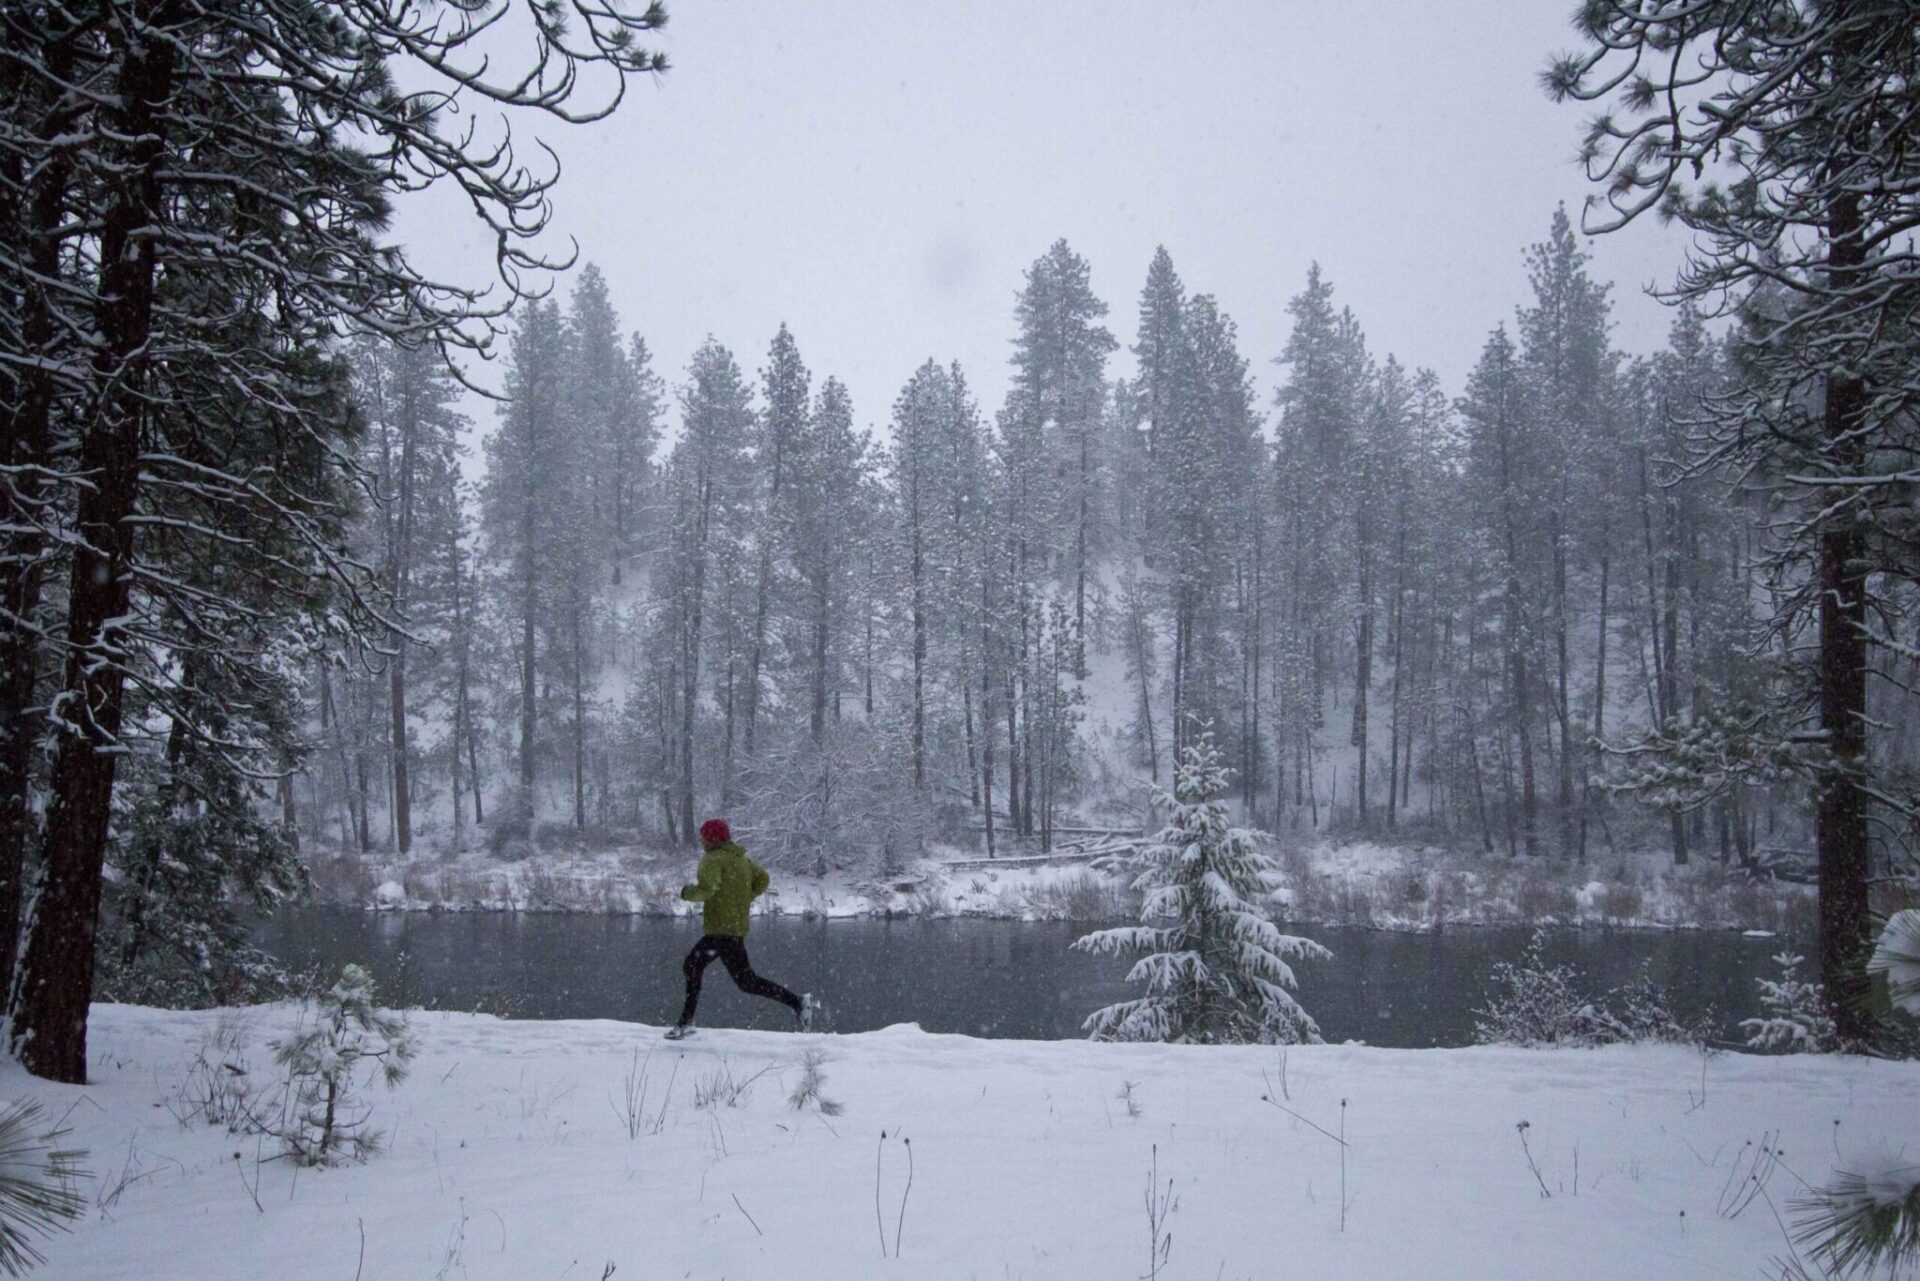 Winter running by the river.